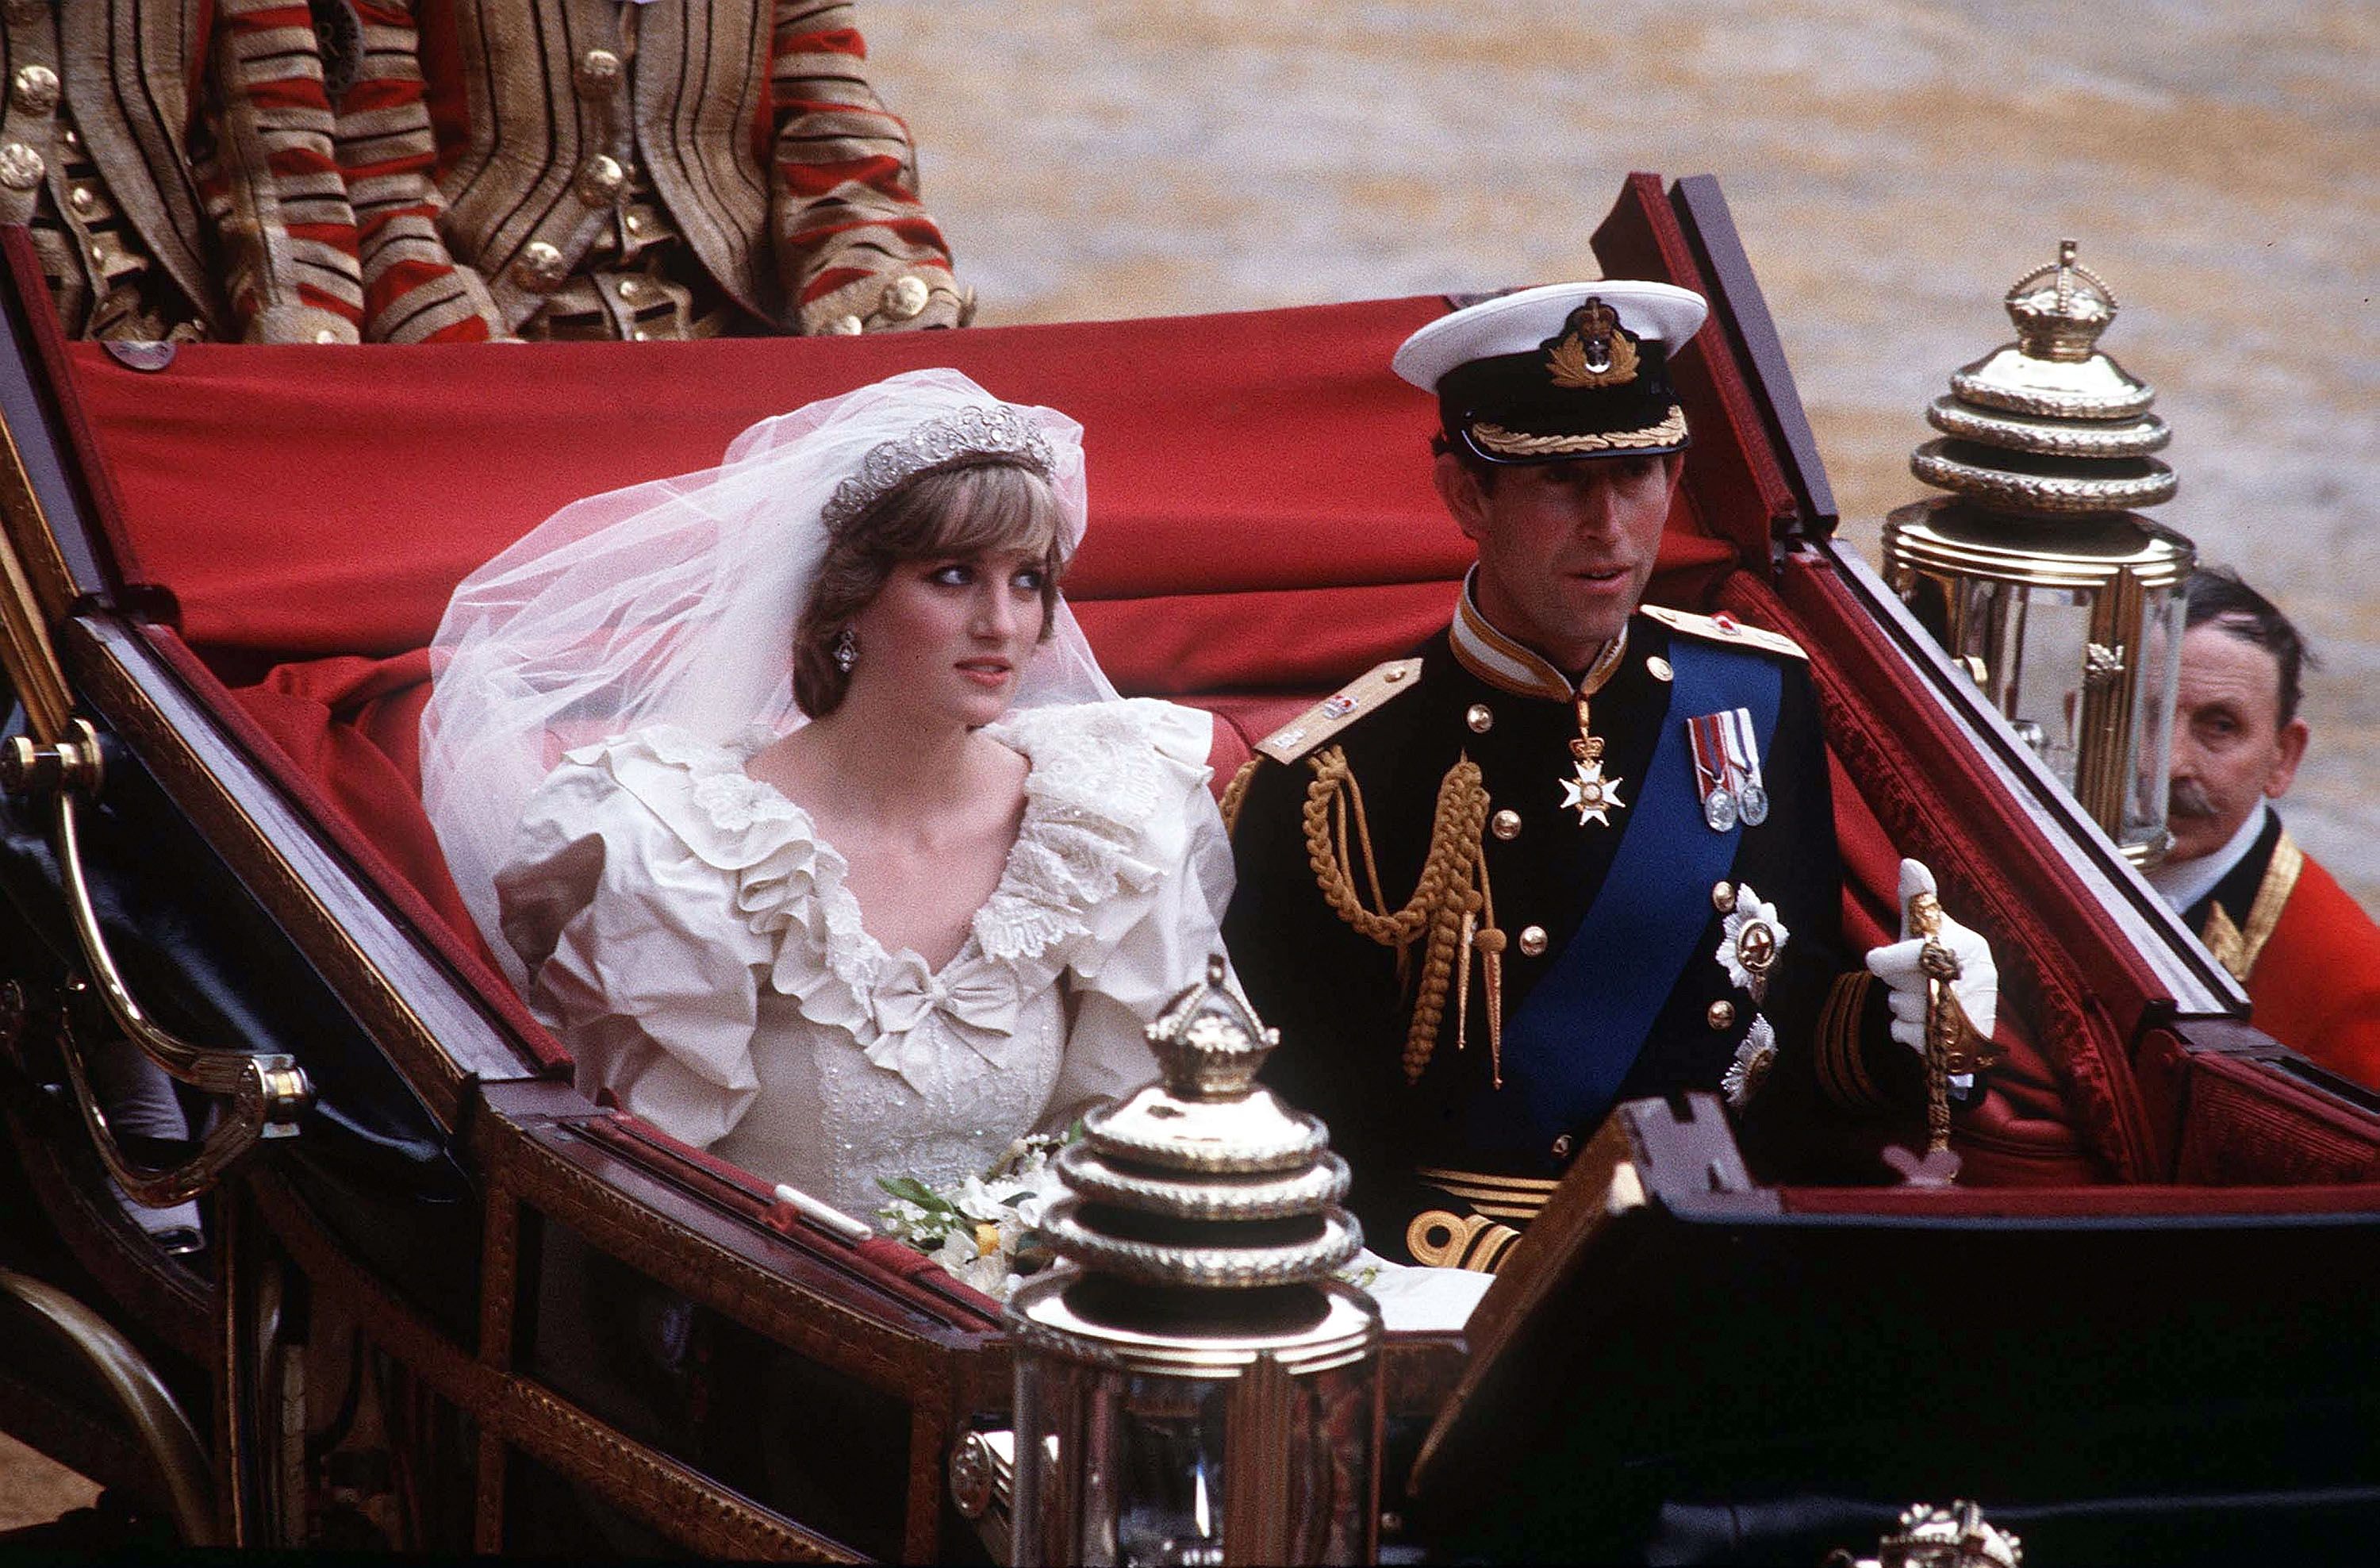  Diana, Princess of Wales and Prince Charles ride in a carriage after their wedding at St. Paul's Cathedral July 29, 1981 | Source: Getty Images